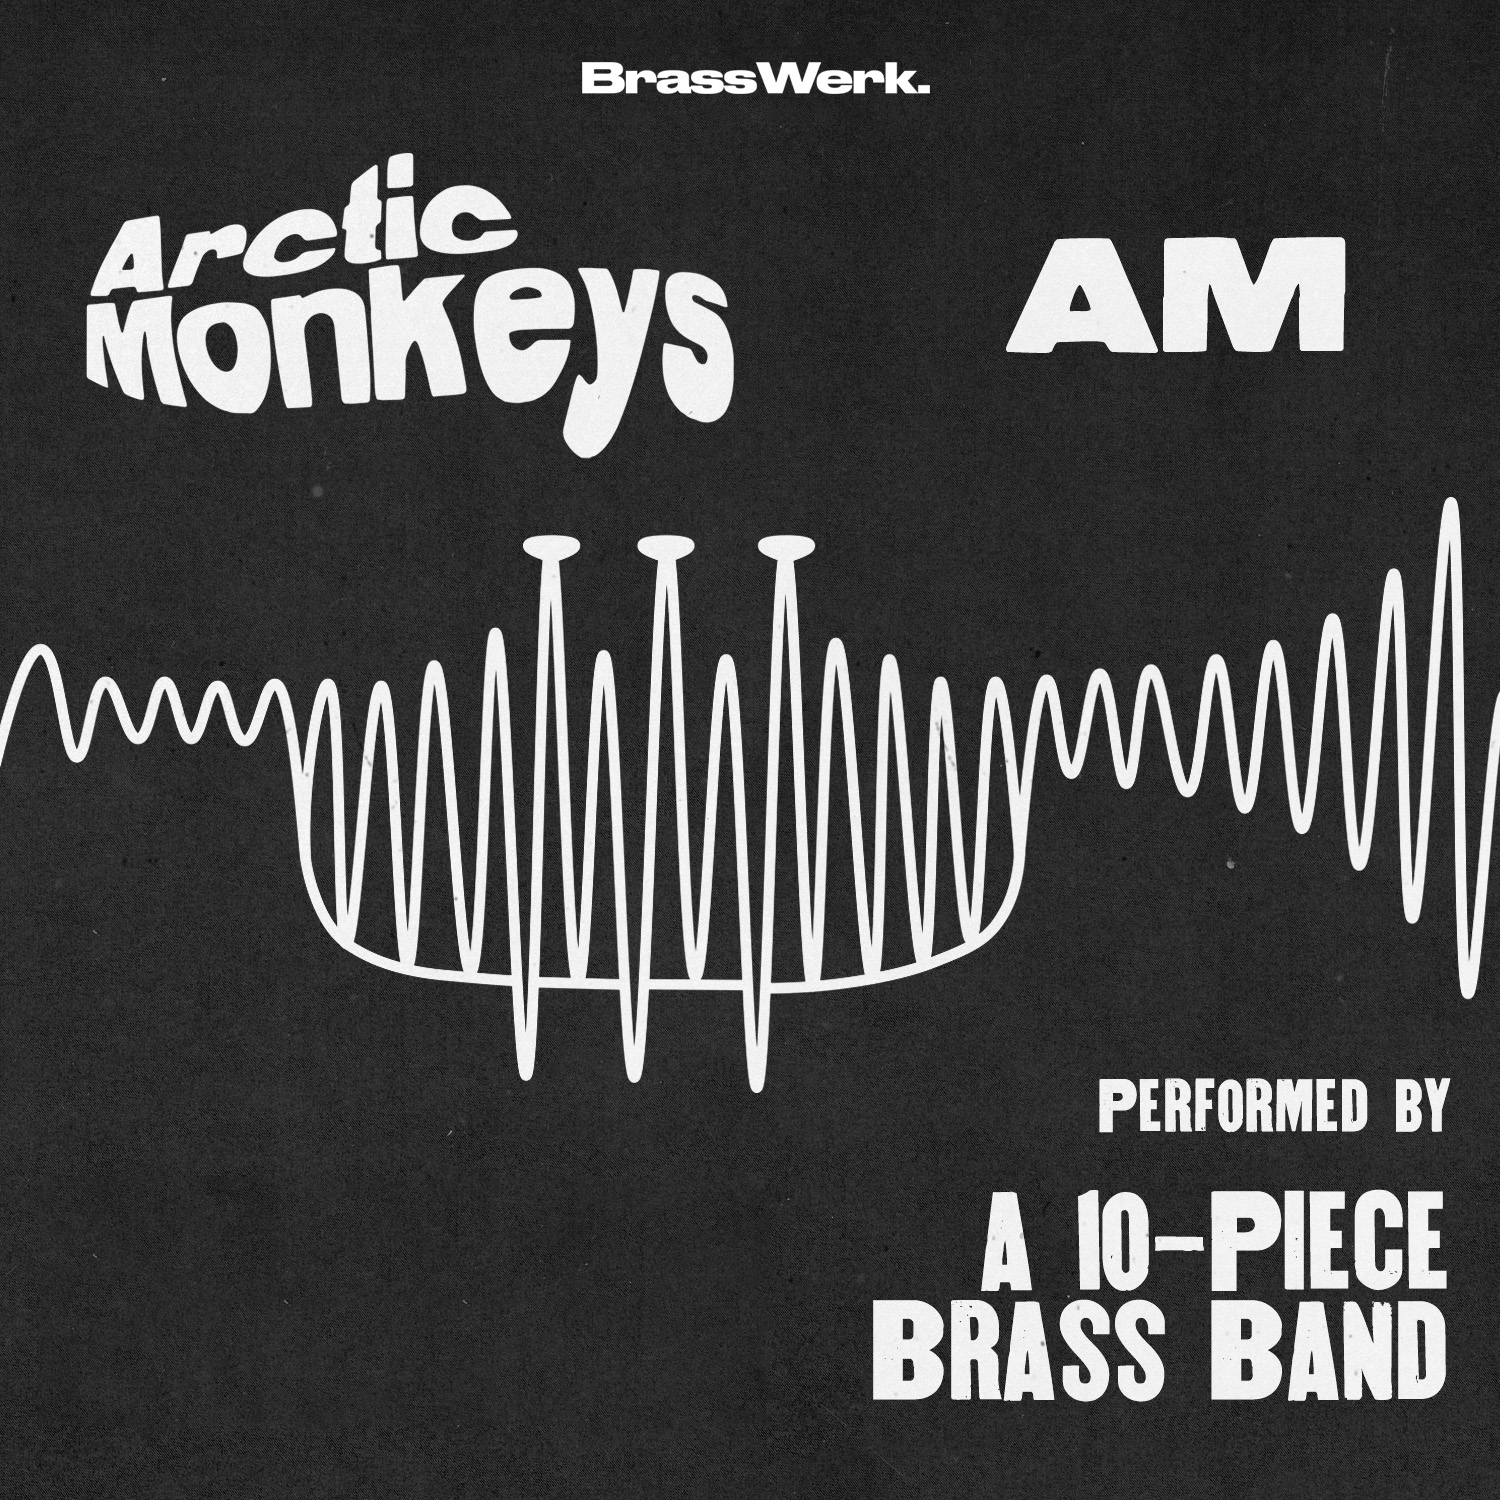 Arctic Monkeys on Brass (AM) at The Blues Kitchen Manchester